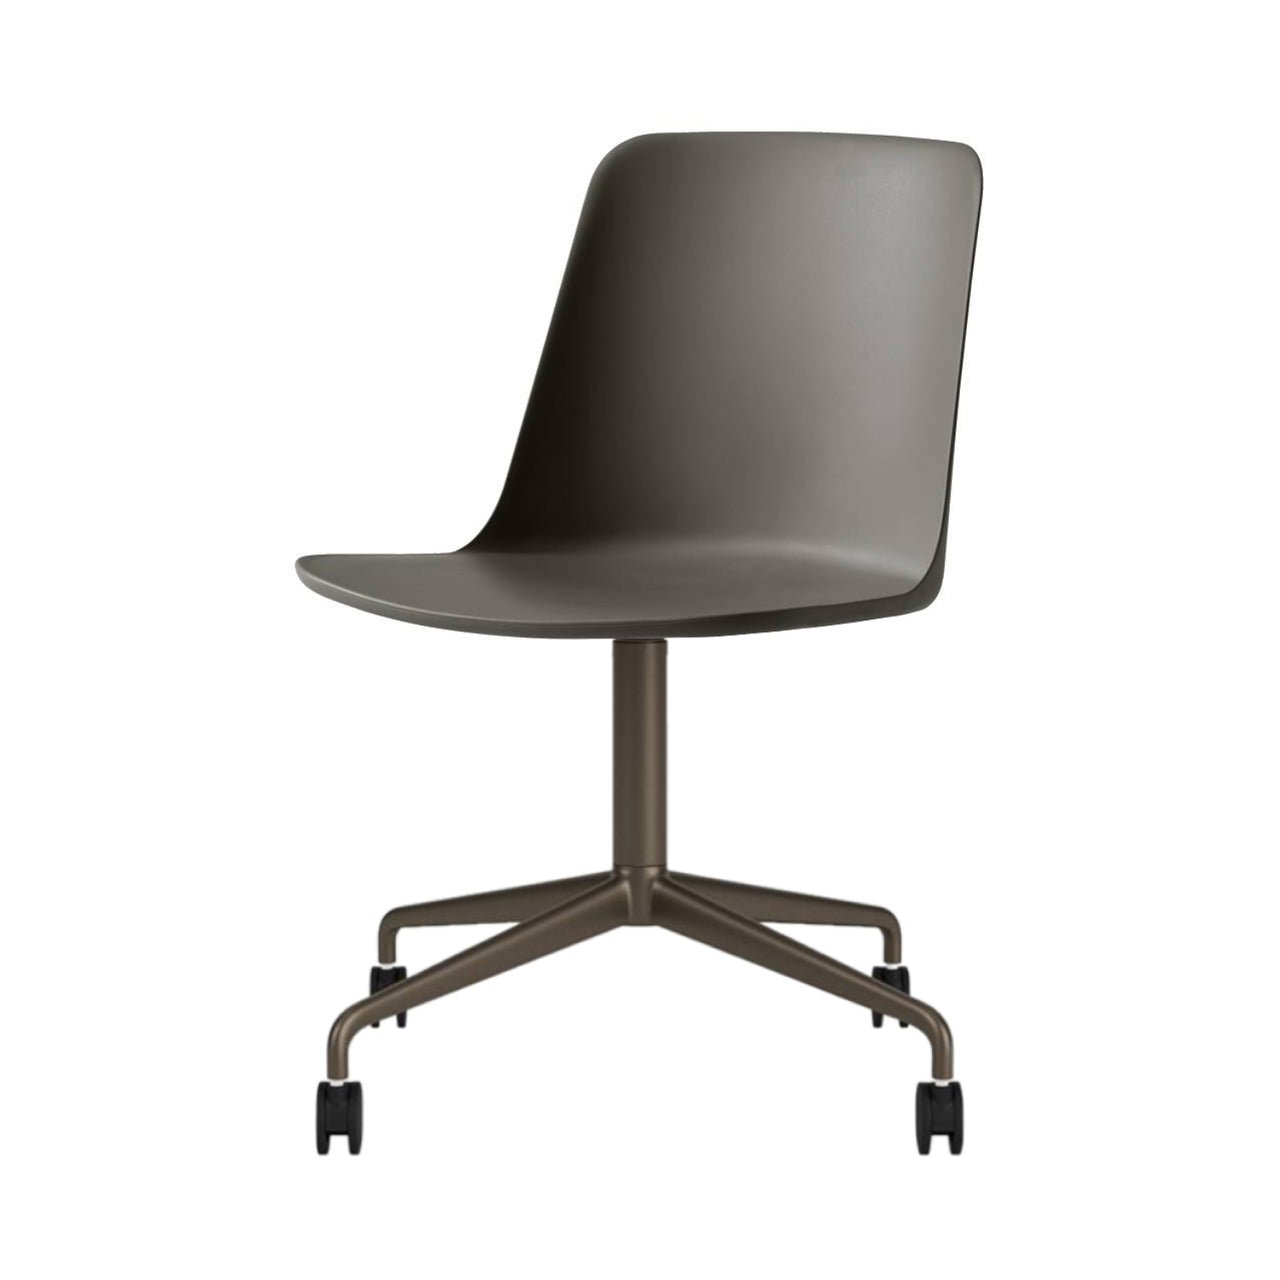 Rely Chair HW21: Stone Grey + Bronzed